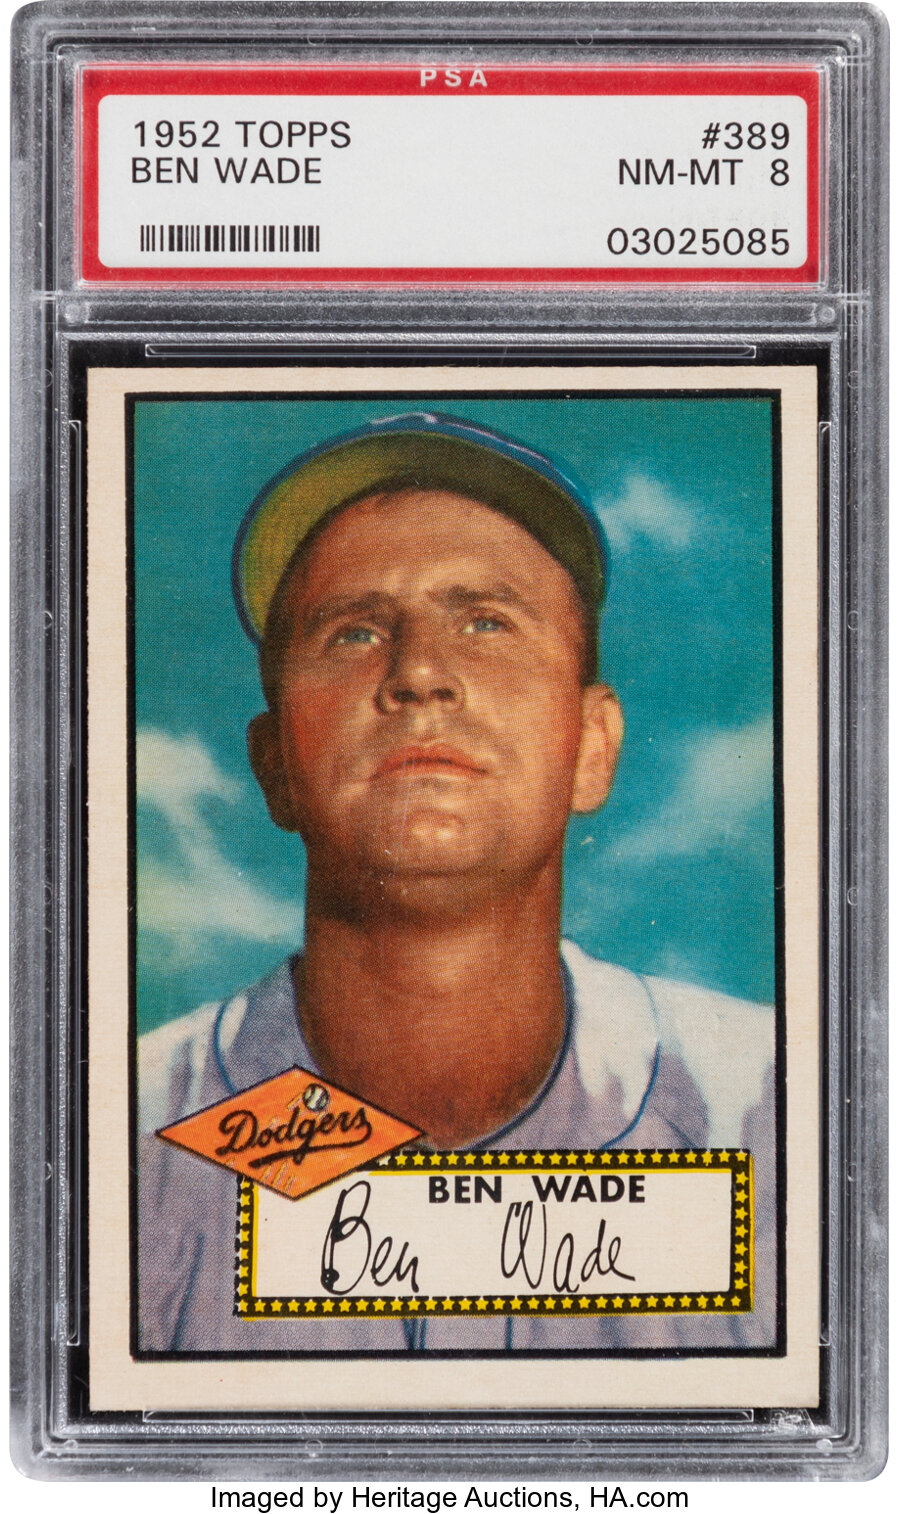 1952 Topps Ben Wade #389 PSA NM-MT 8 - Only Four Higher